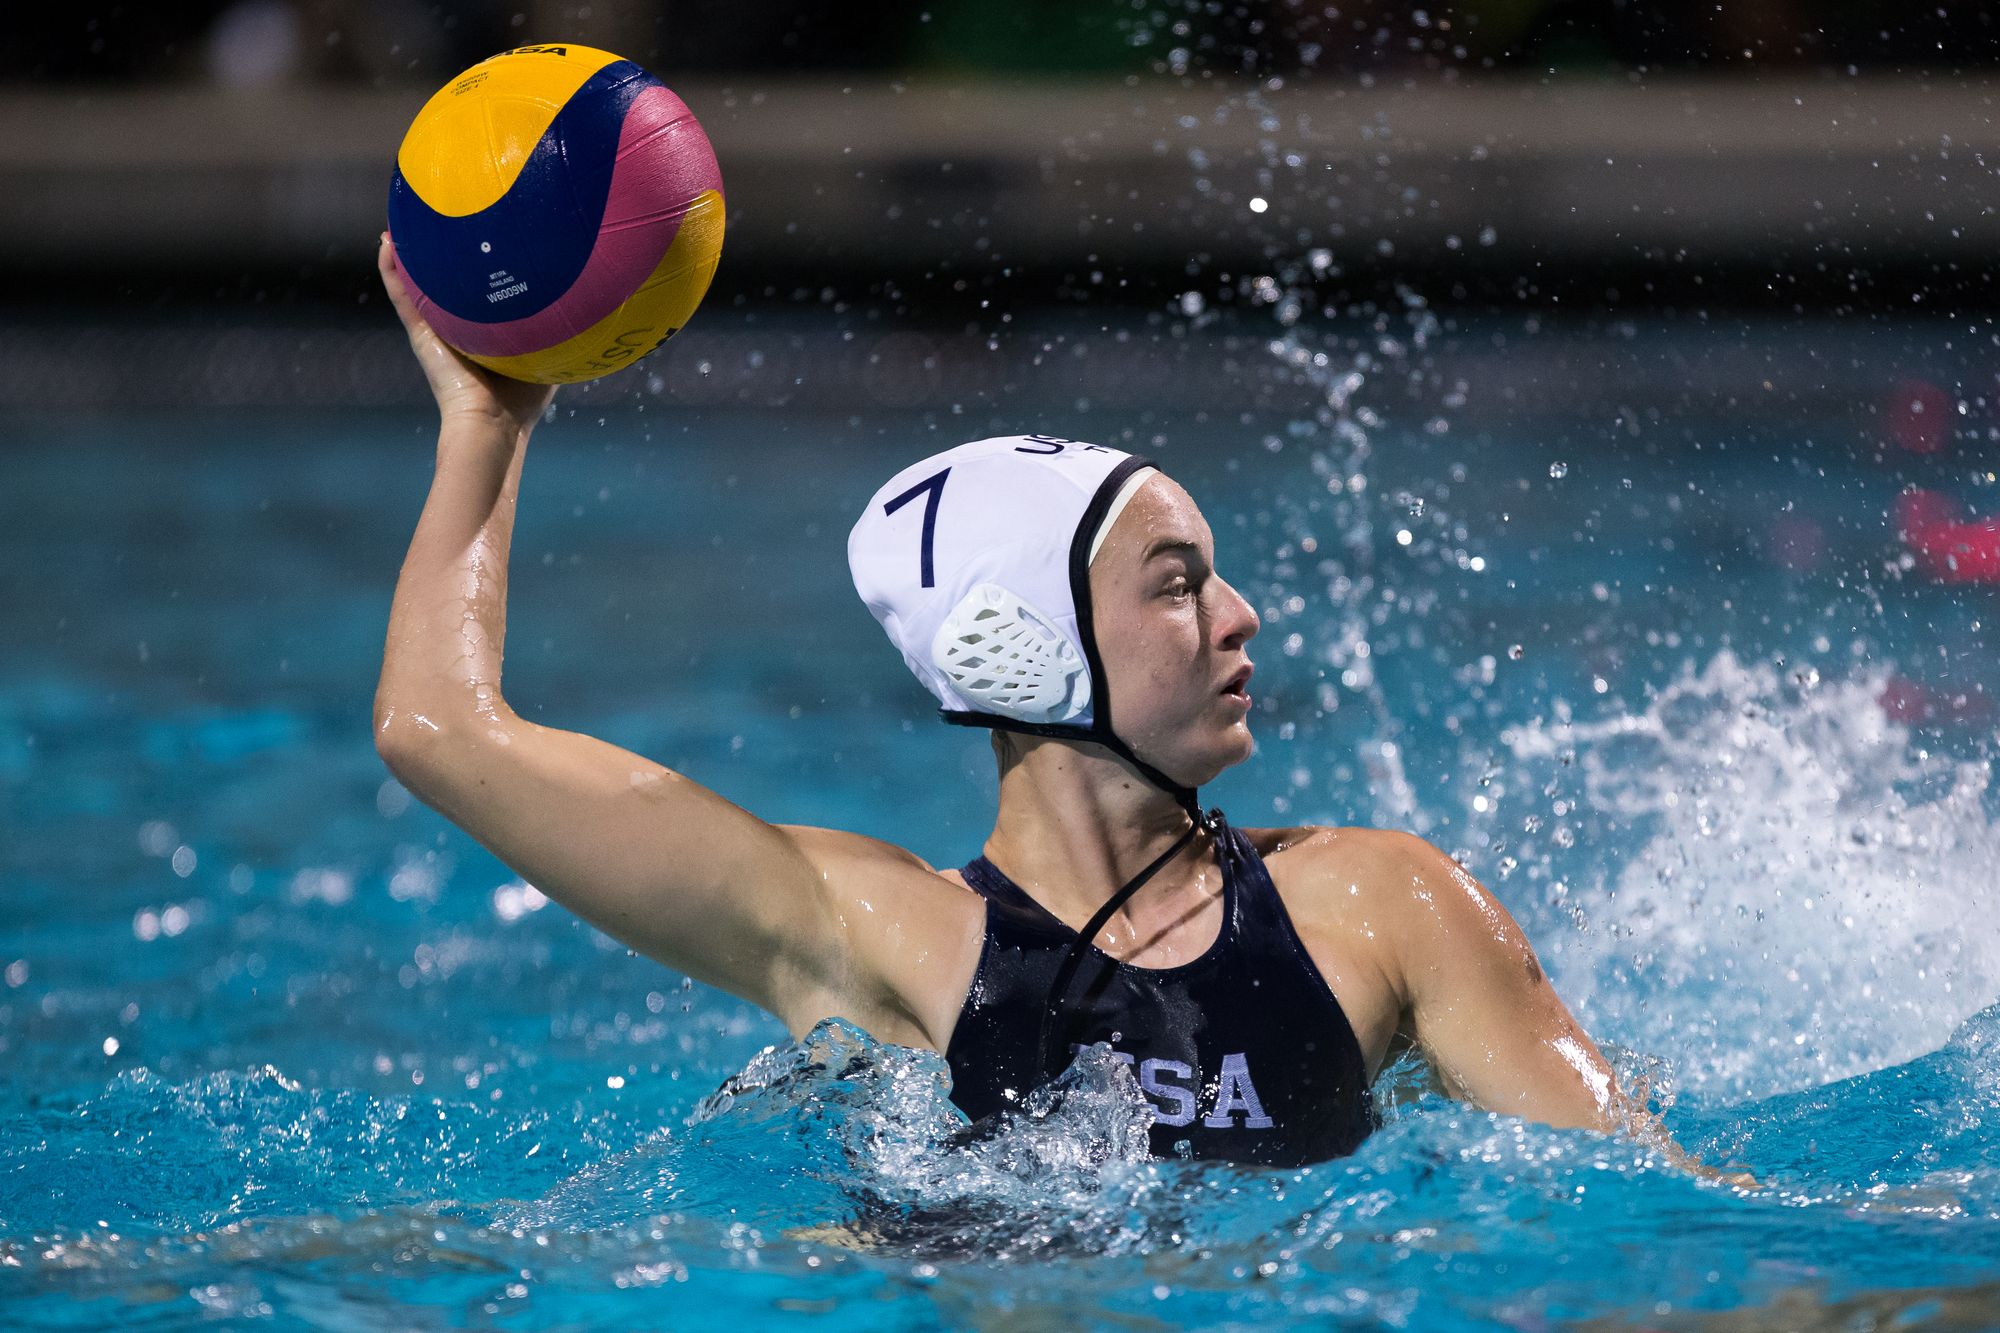 2020 Tokyo Olympics: Get to Know US Women's Water Polo and Jordan Raney